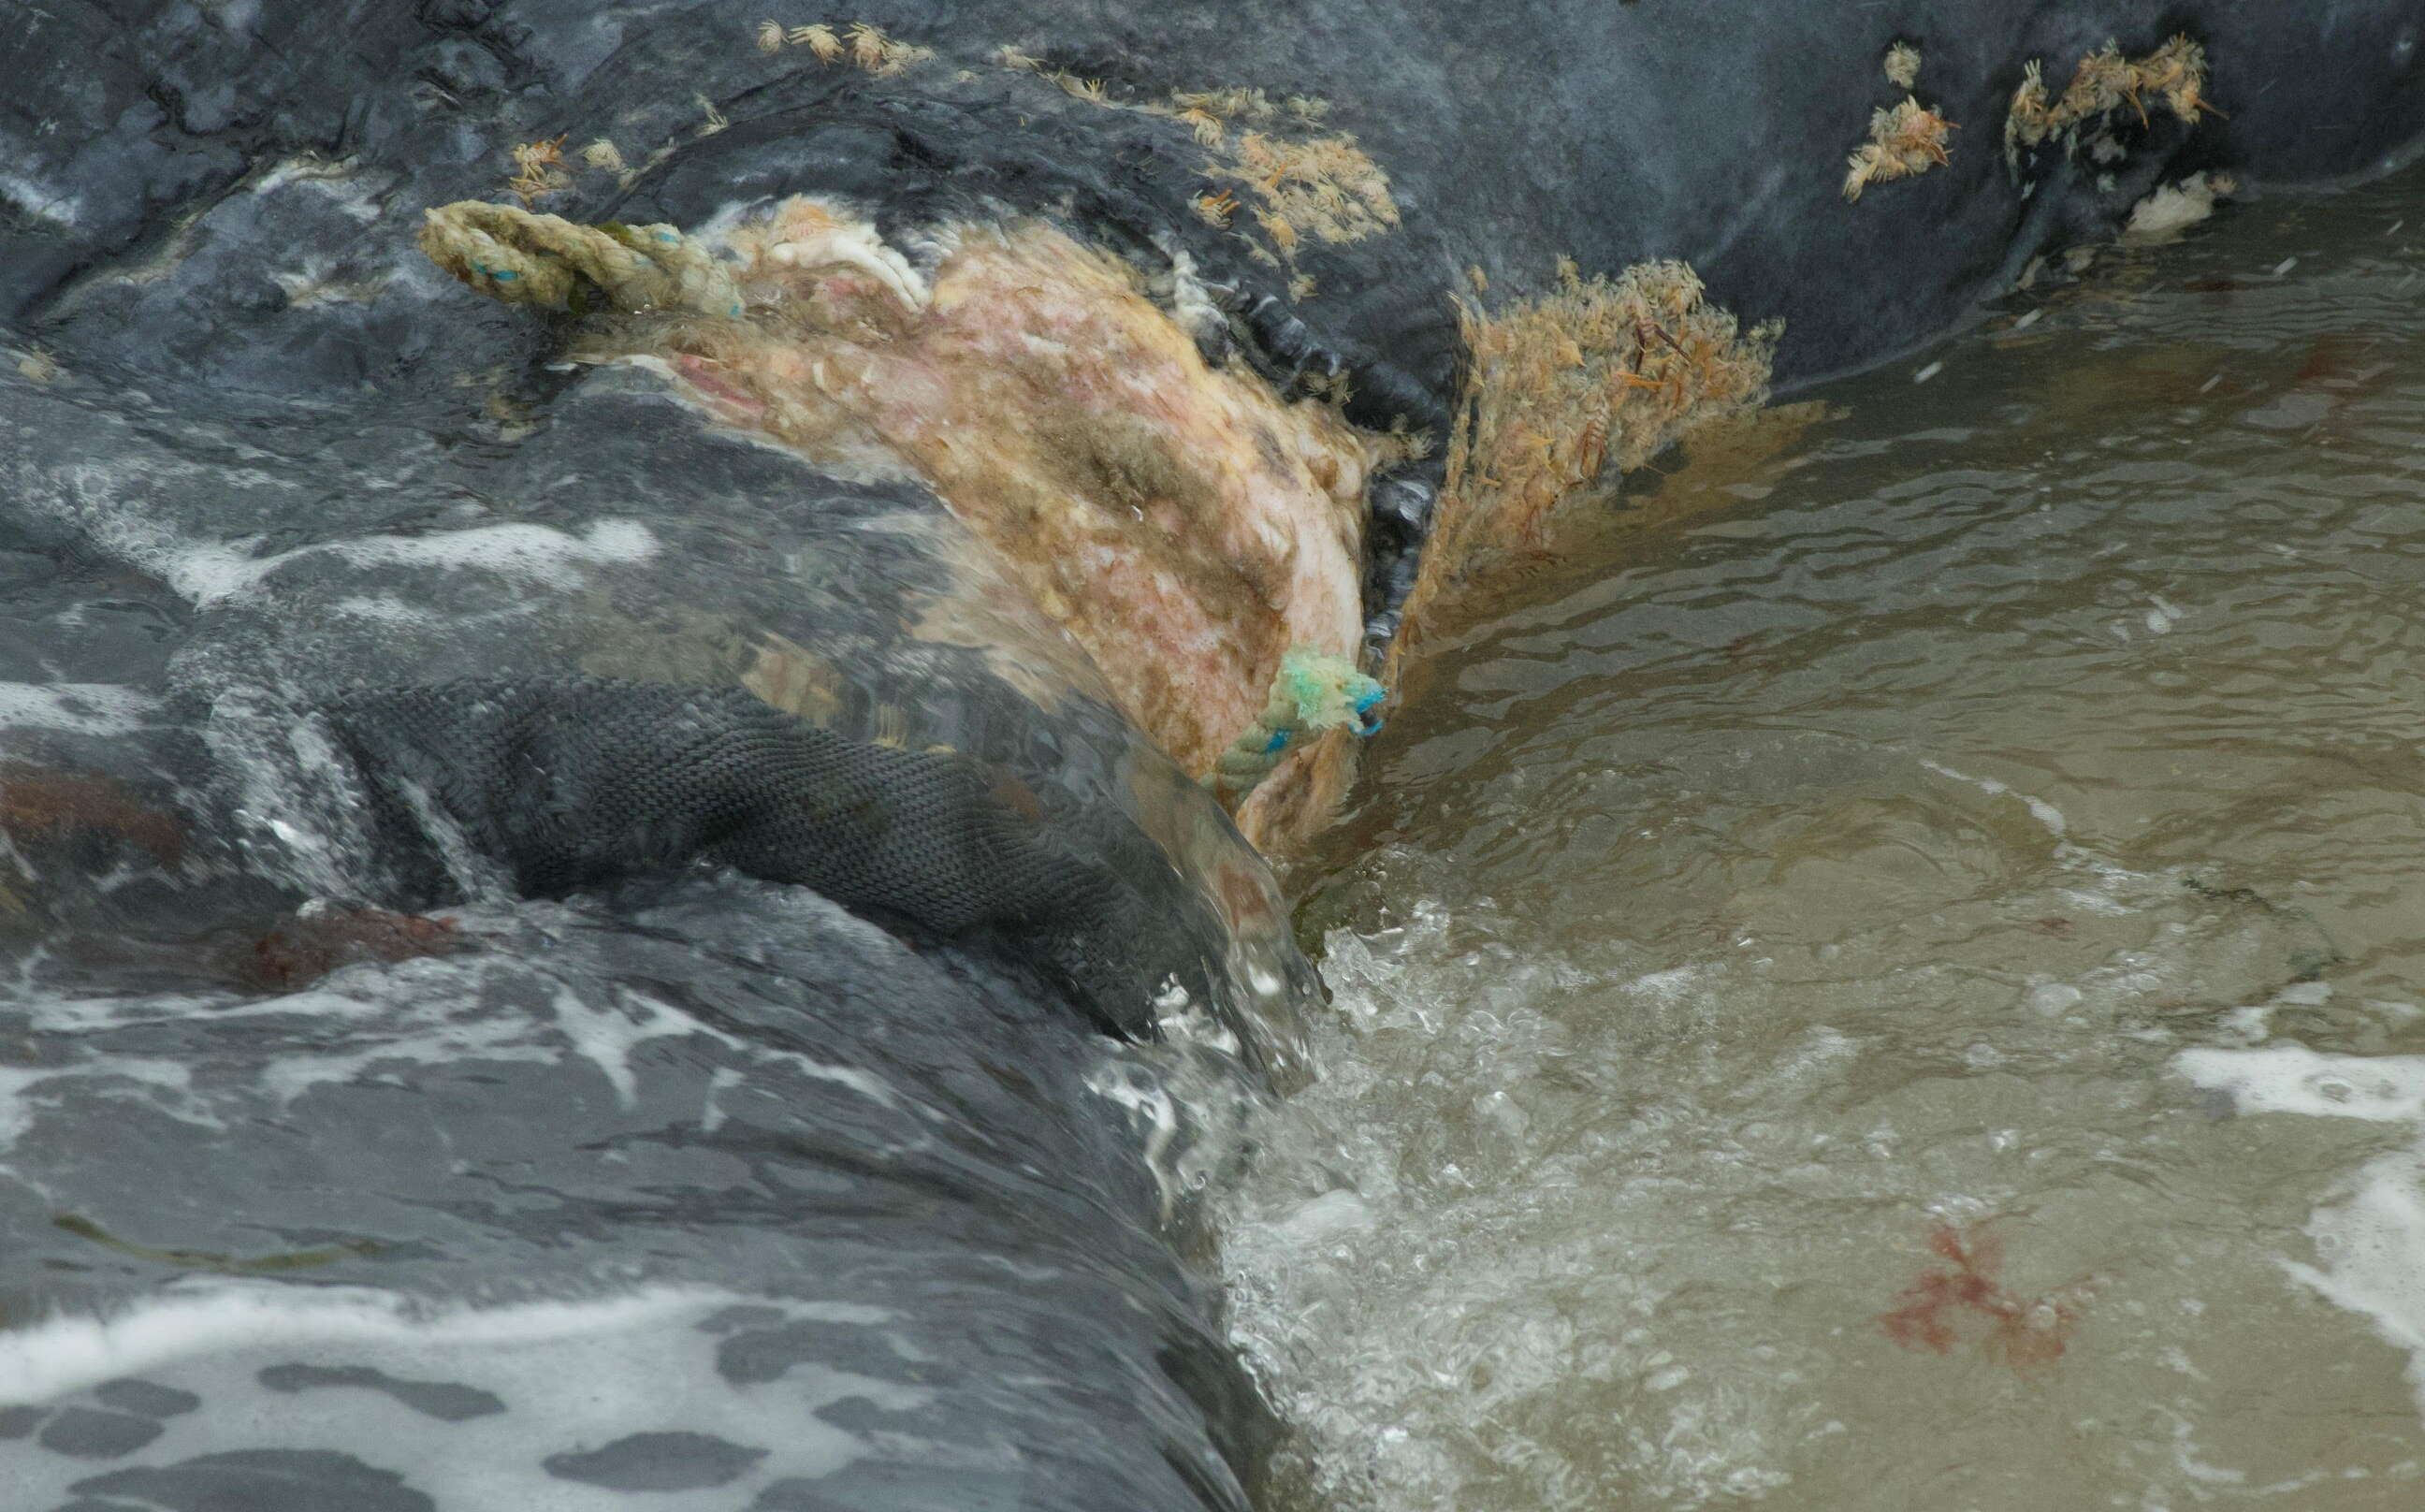 closeup of flesh with bit of green rope in water